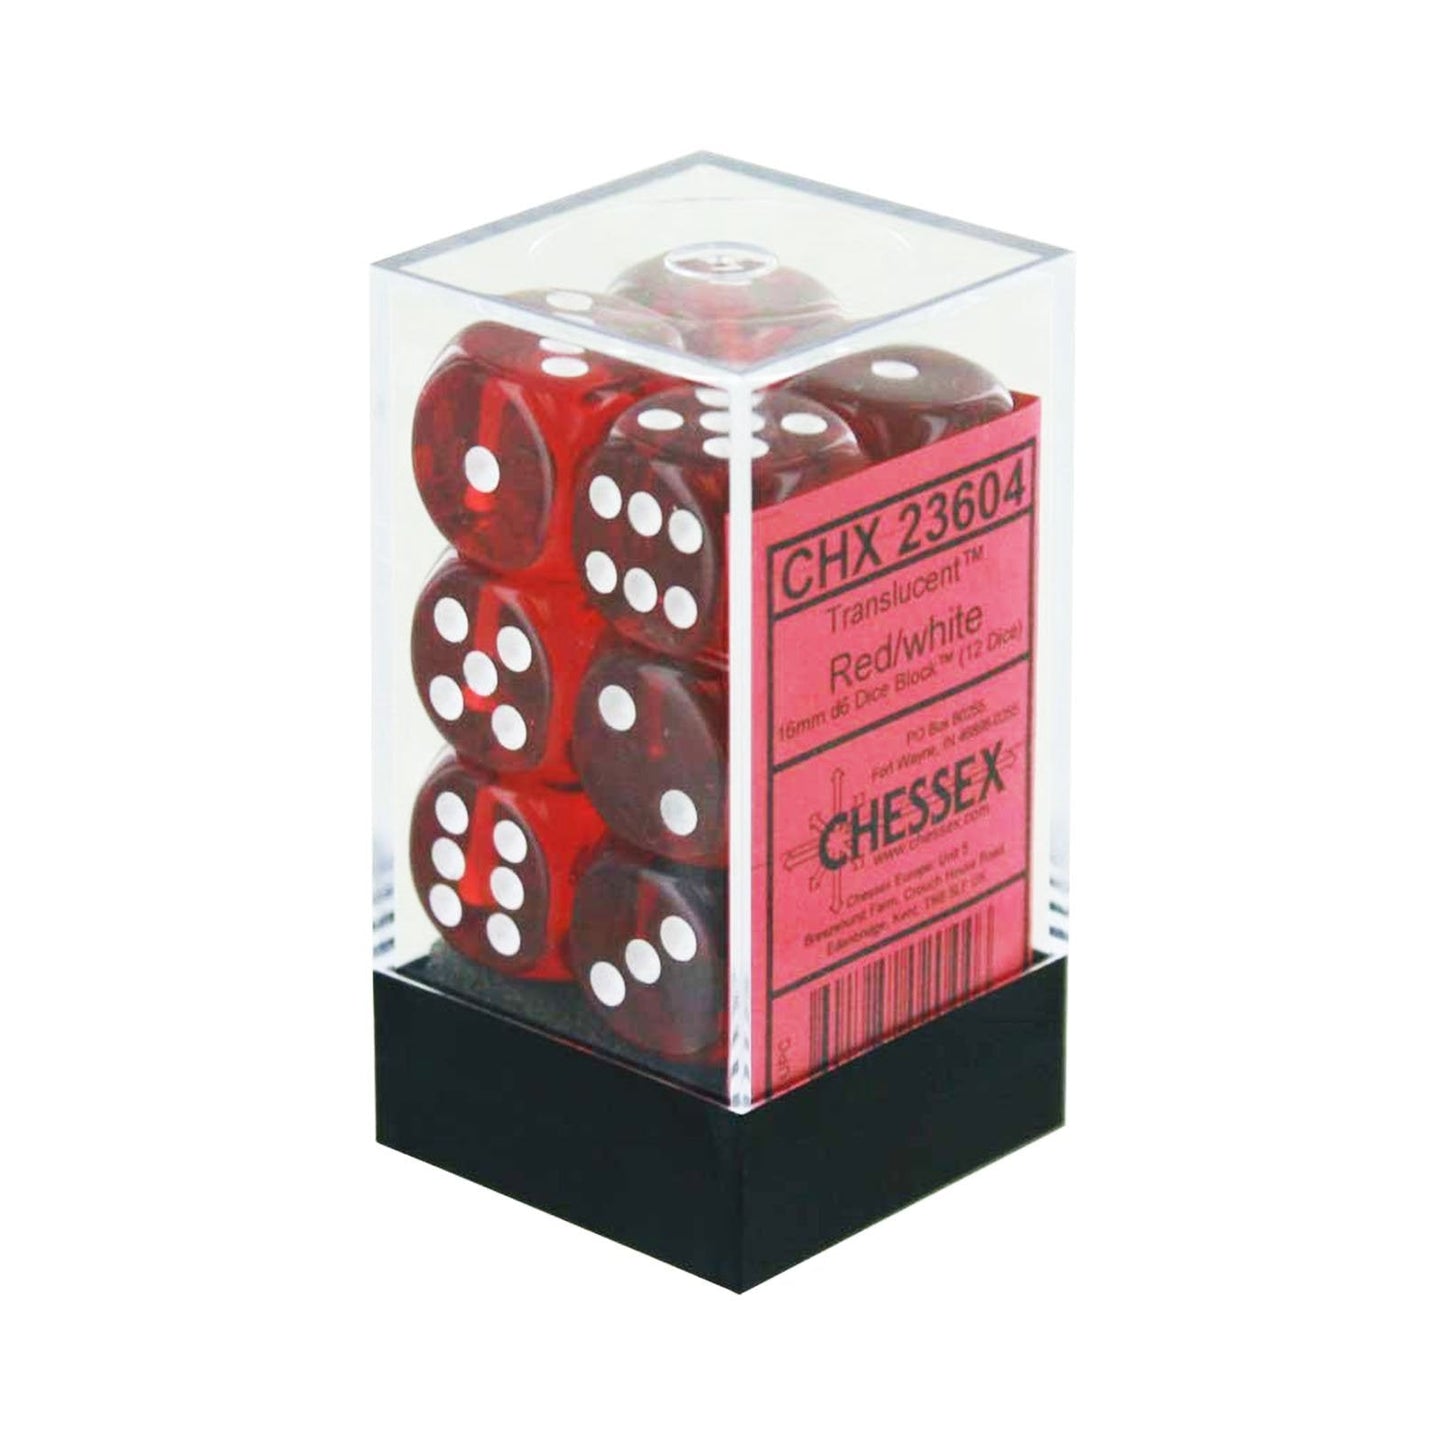 Chessex Dice: D6 Block 16mm - Translucent - Red with White (CHX 23604) - Gamescape